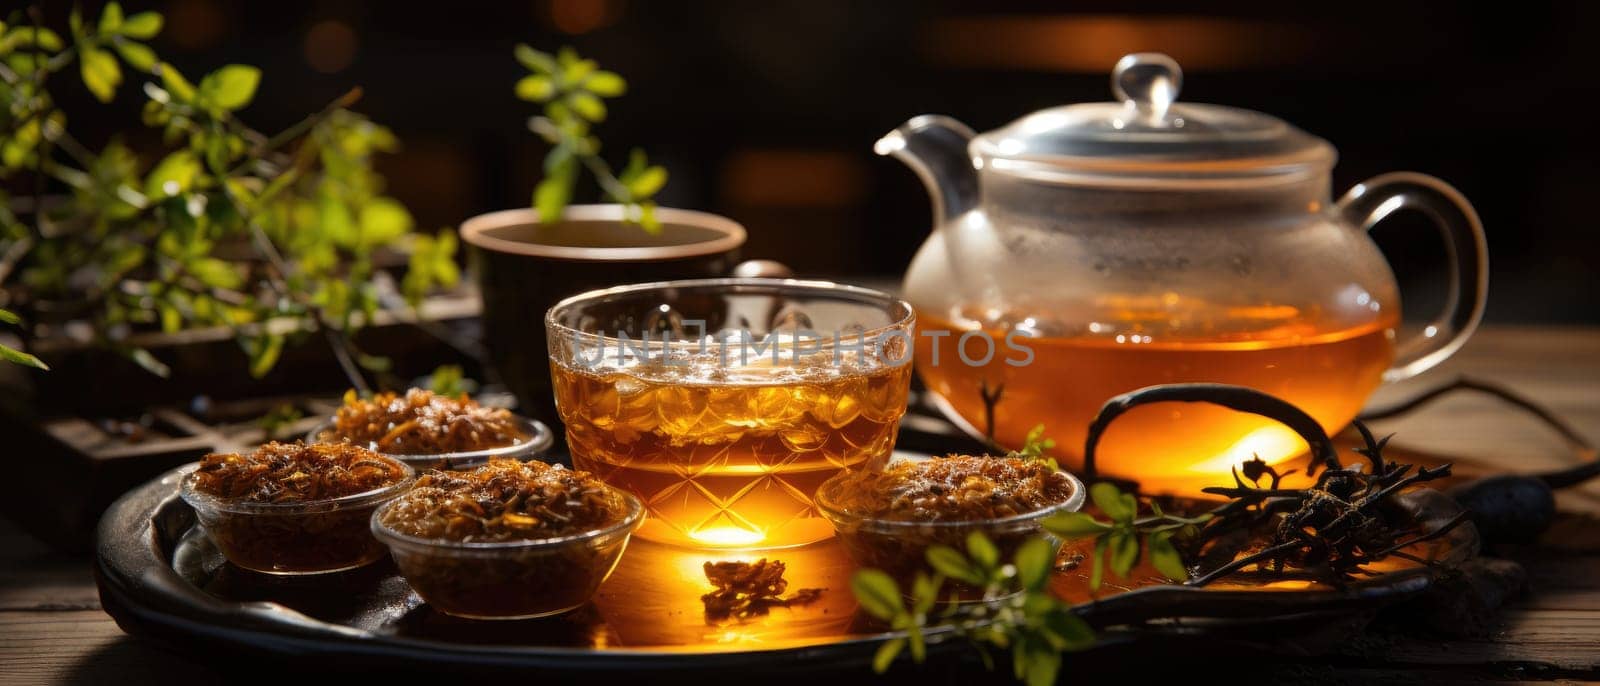 The magic of the tea idyll unfolds with a mug, a glass teapot and a wooden tray against the backdrop of a peaceful atmosphere.